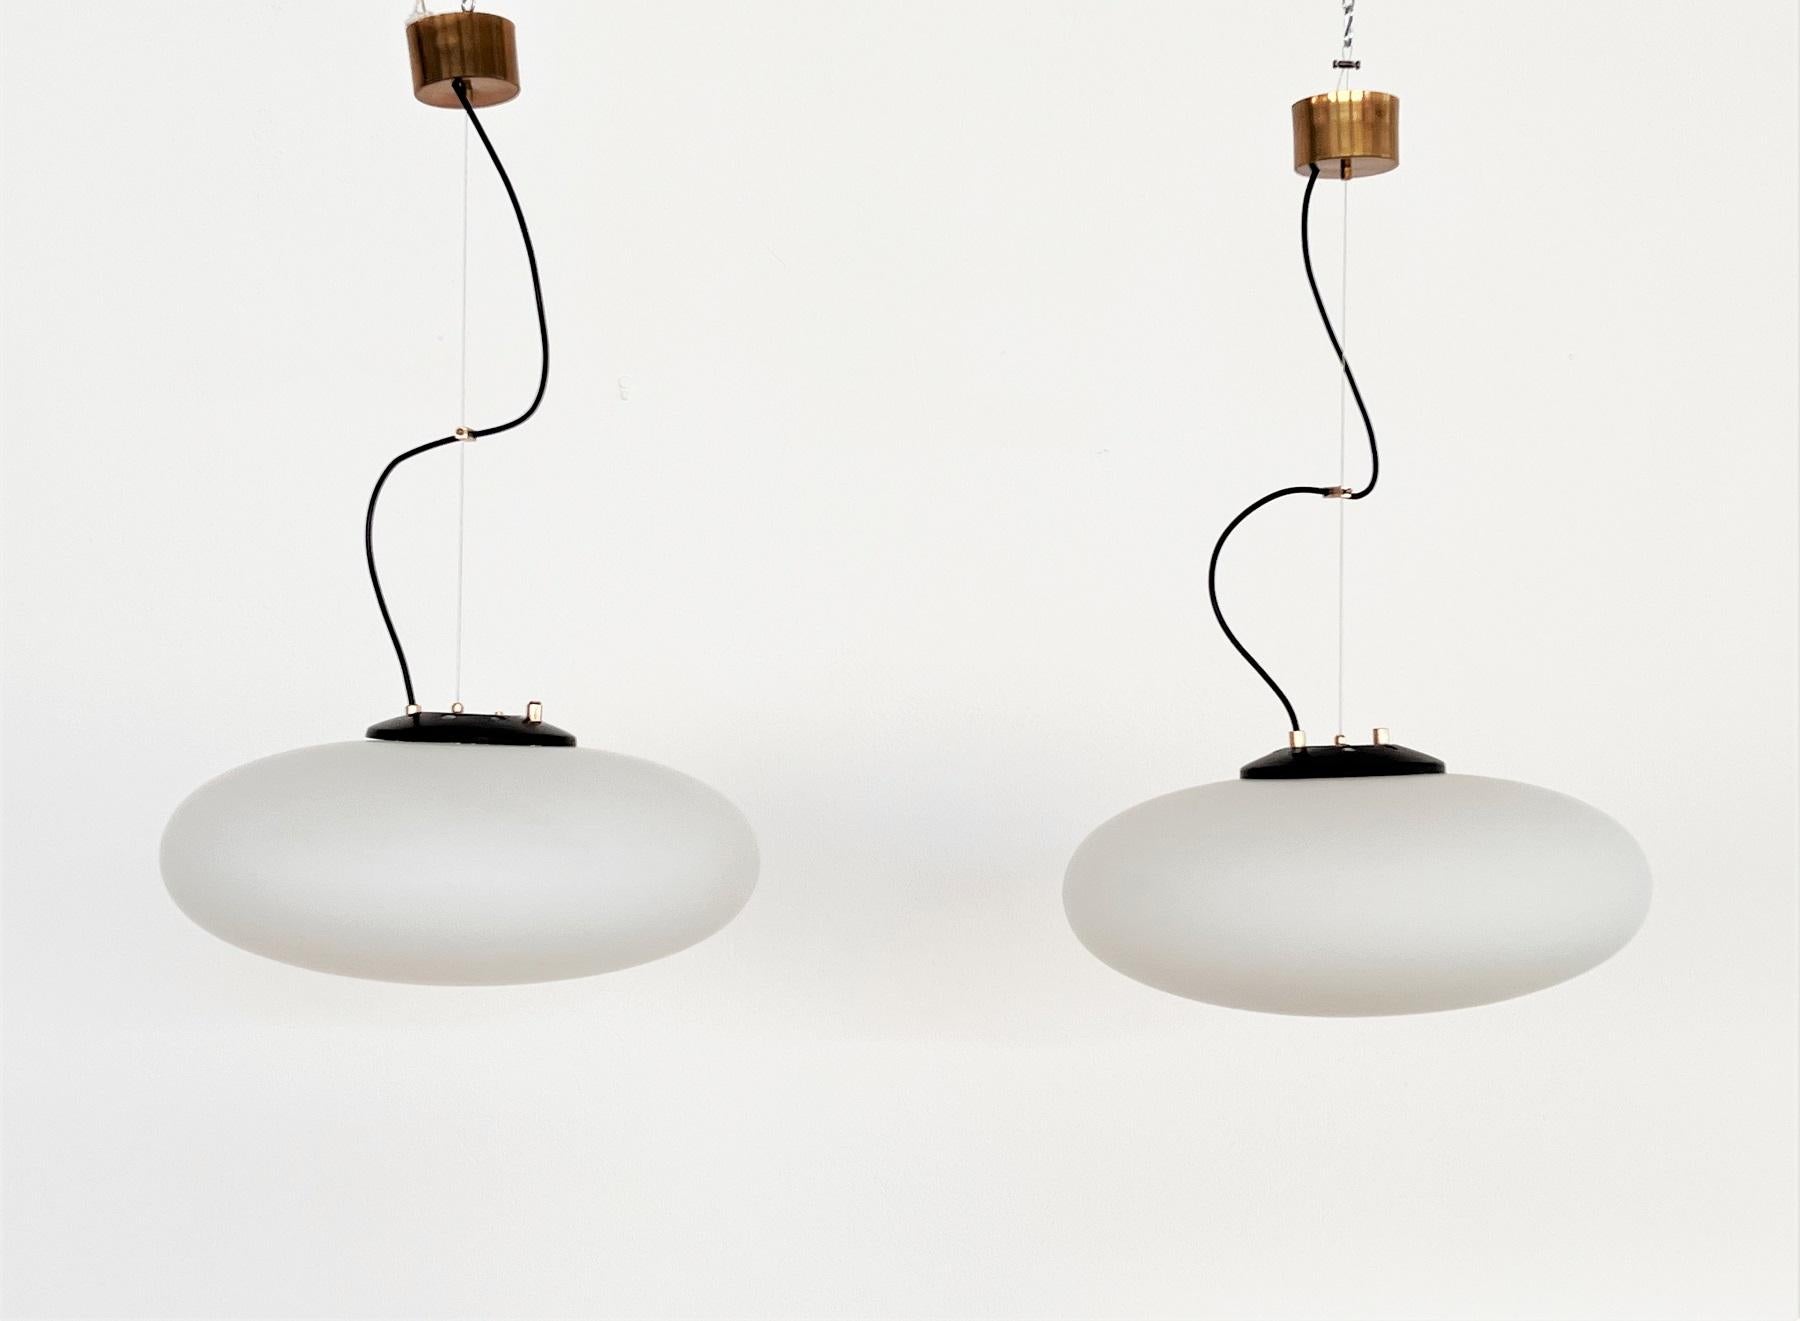 Gorgeous pair of two pendant lights with stunning opaline glass Made in Italy by Stilnovo.
The pendants are fixed with steel cable (new) and original ceiling rose in dark brass to the ceiling.
Both lights come from the same household and are in